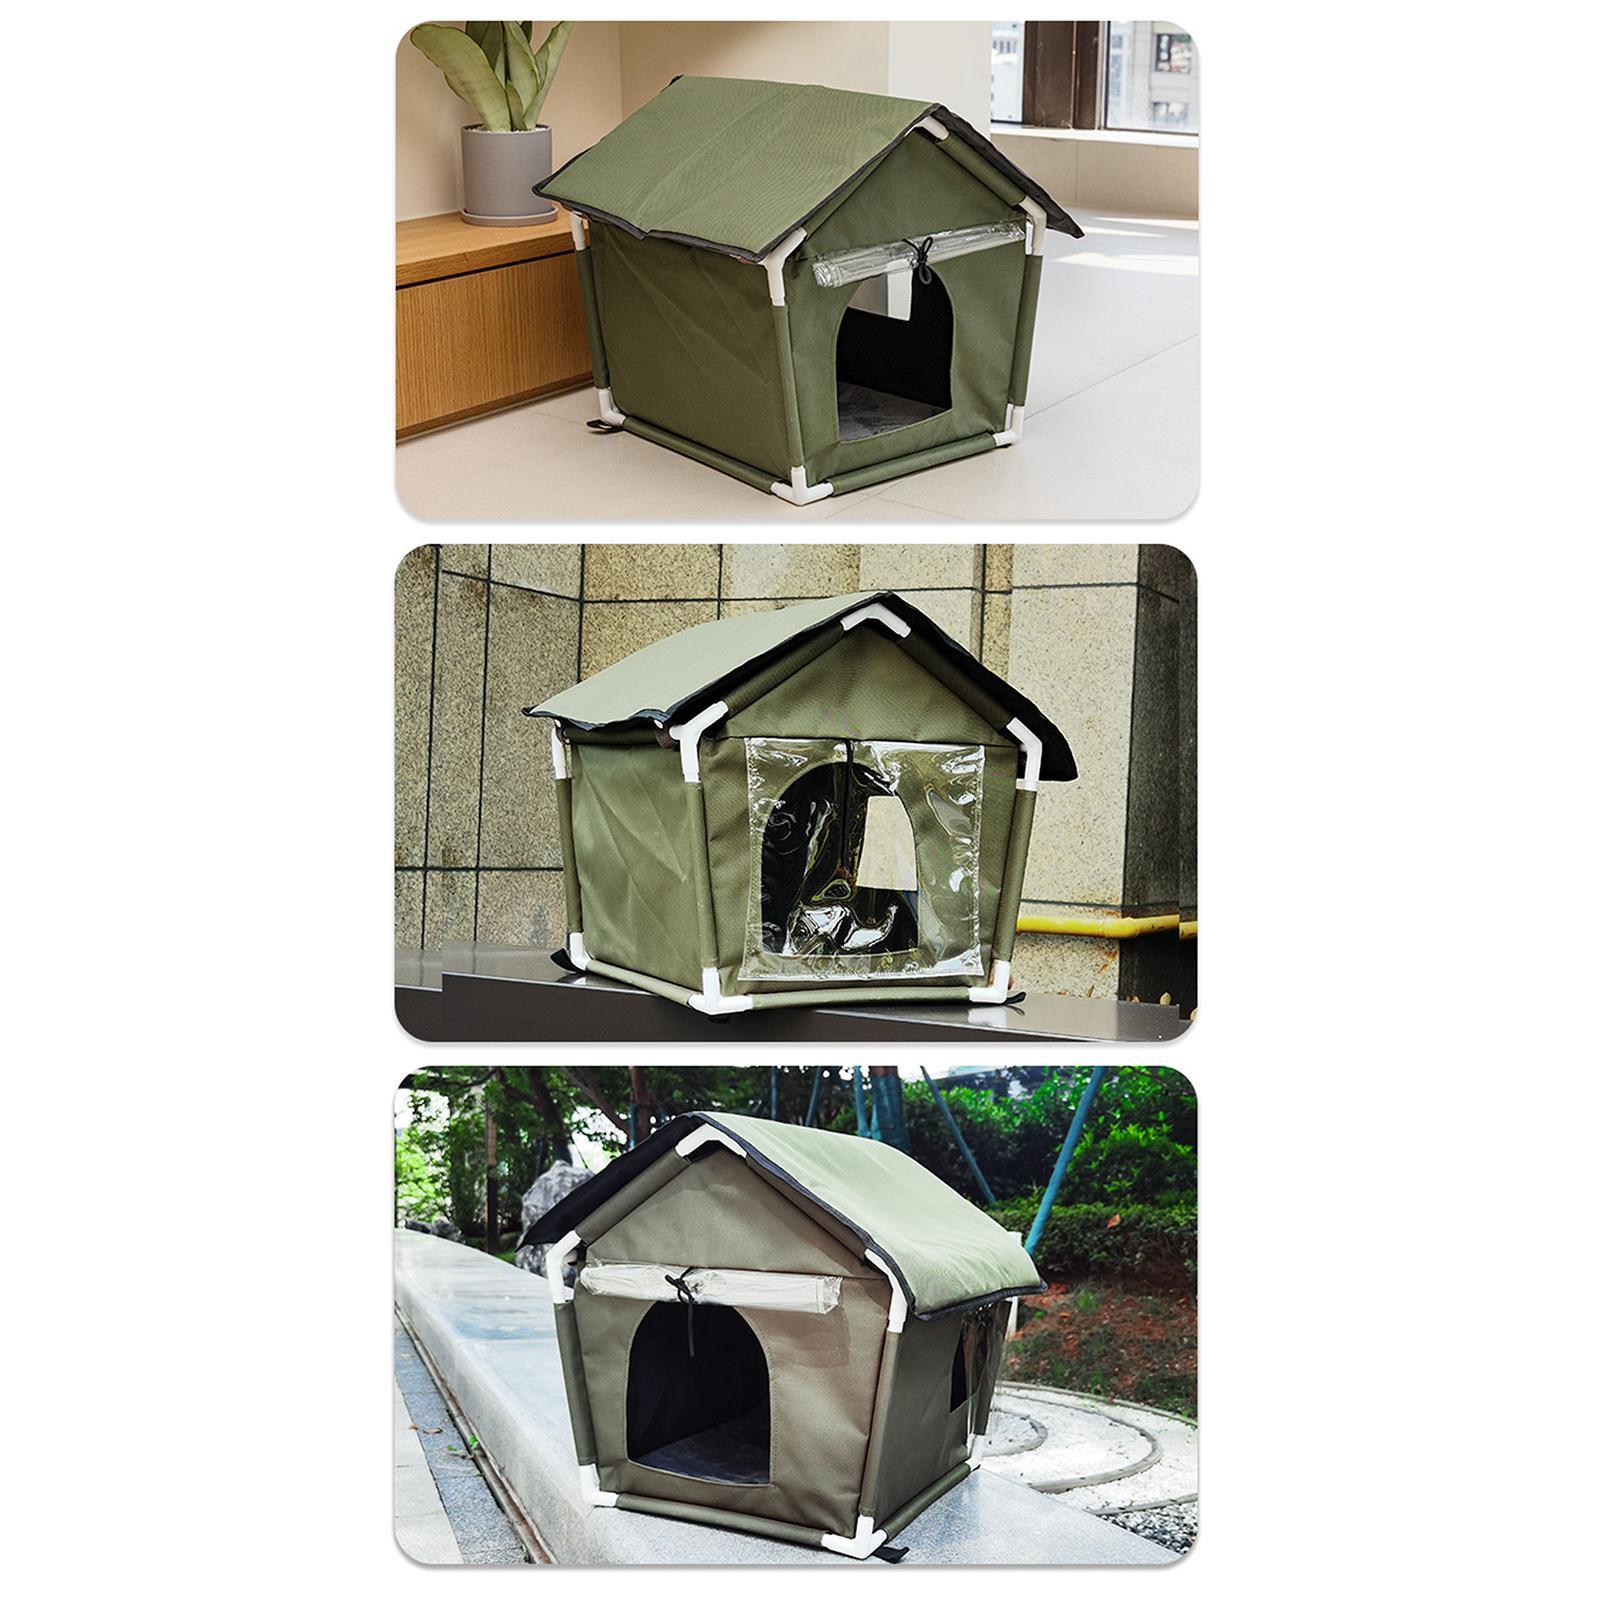 Cat Nest Sleeping Bed Pet Sleeping Bed for Puppy Outdoor Cats and Small Dogs